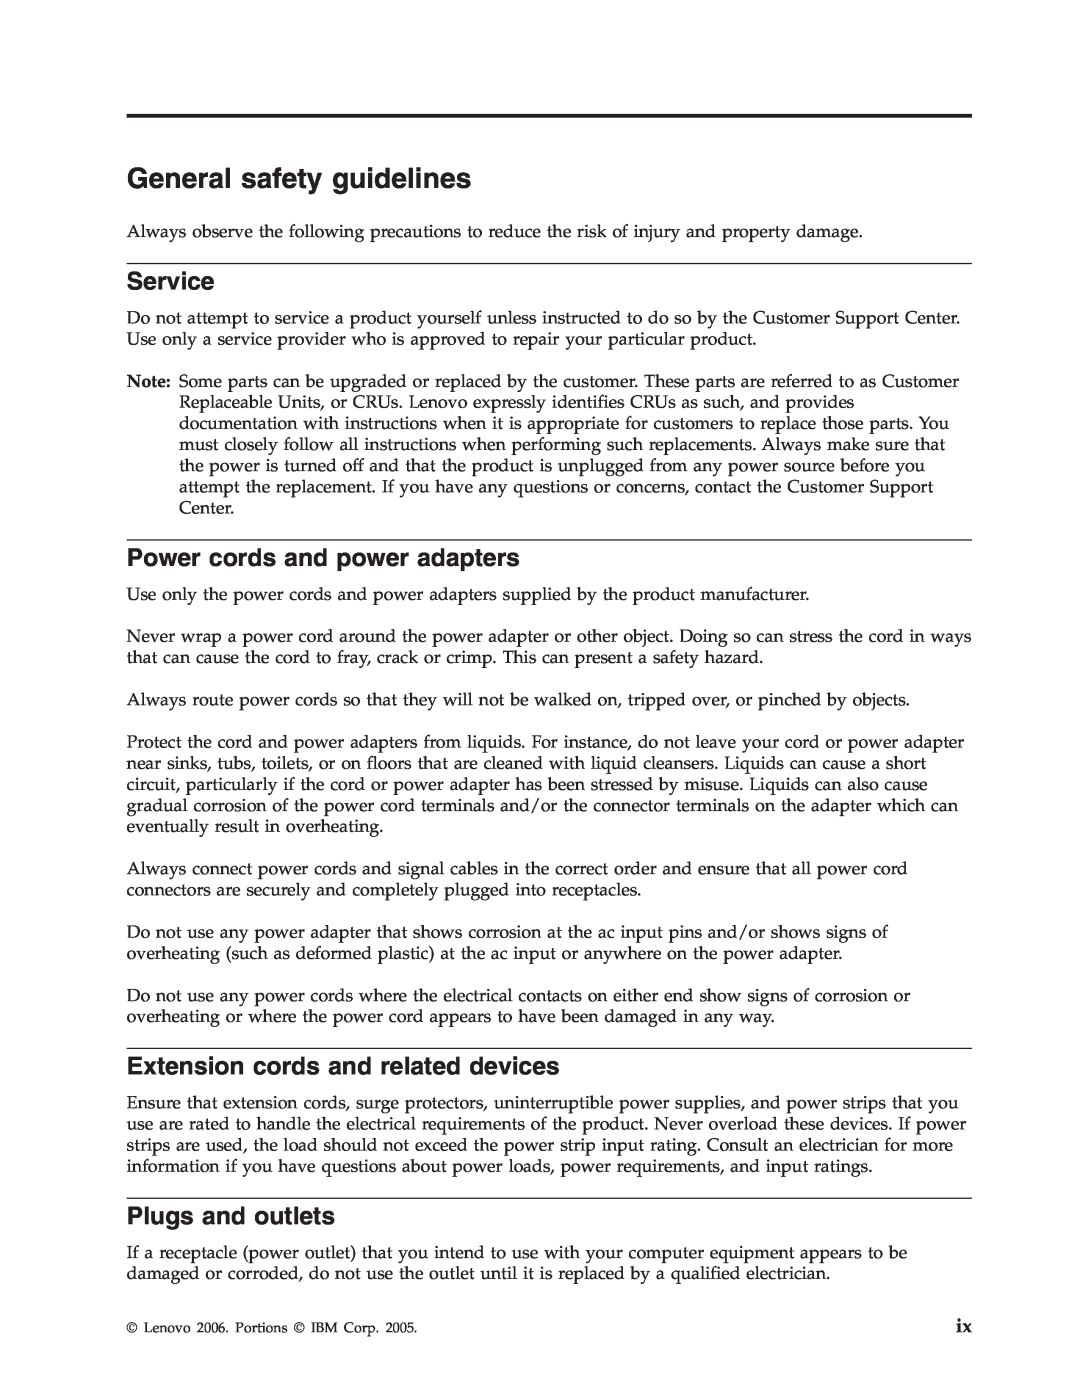 Lenovo 41N5583 General safety guidelines, Service, Power cords and power adapters, Extension cords and related devices 